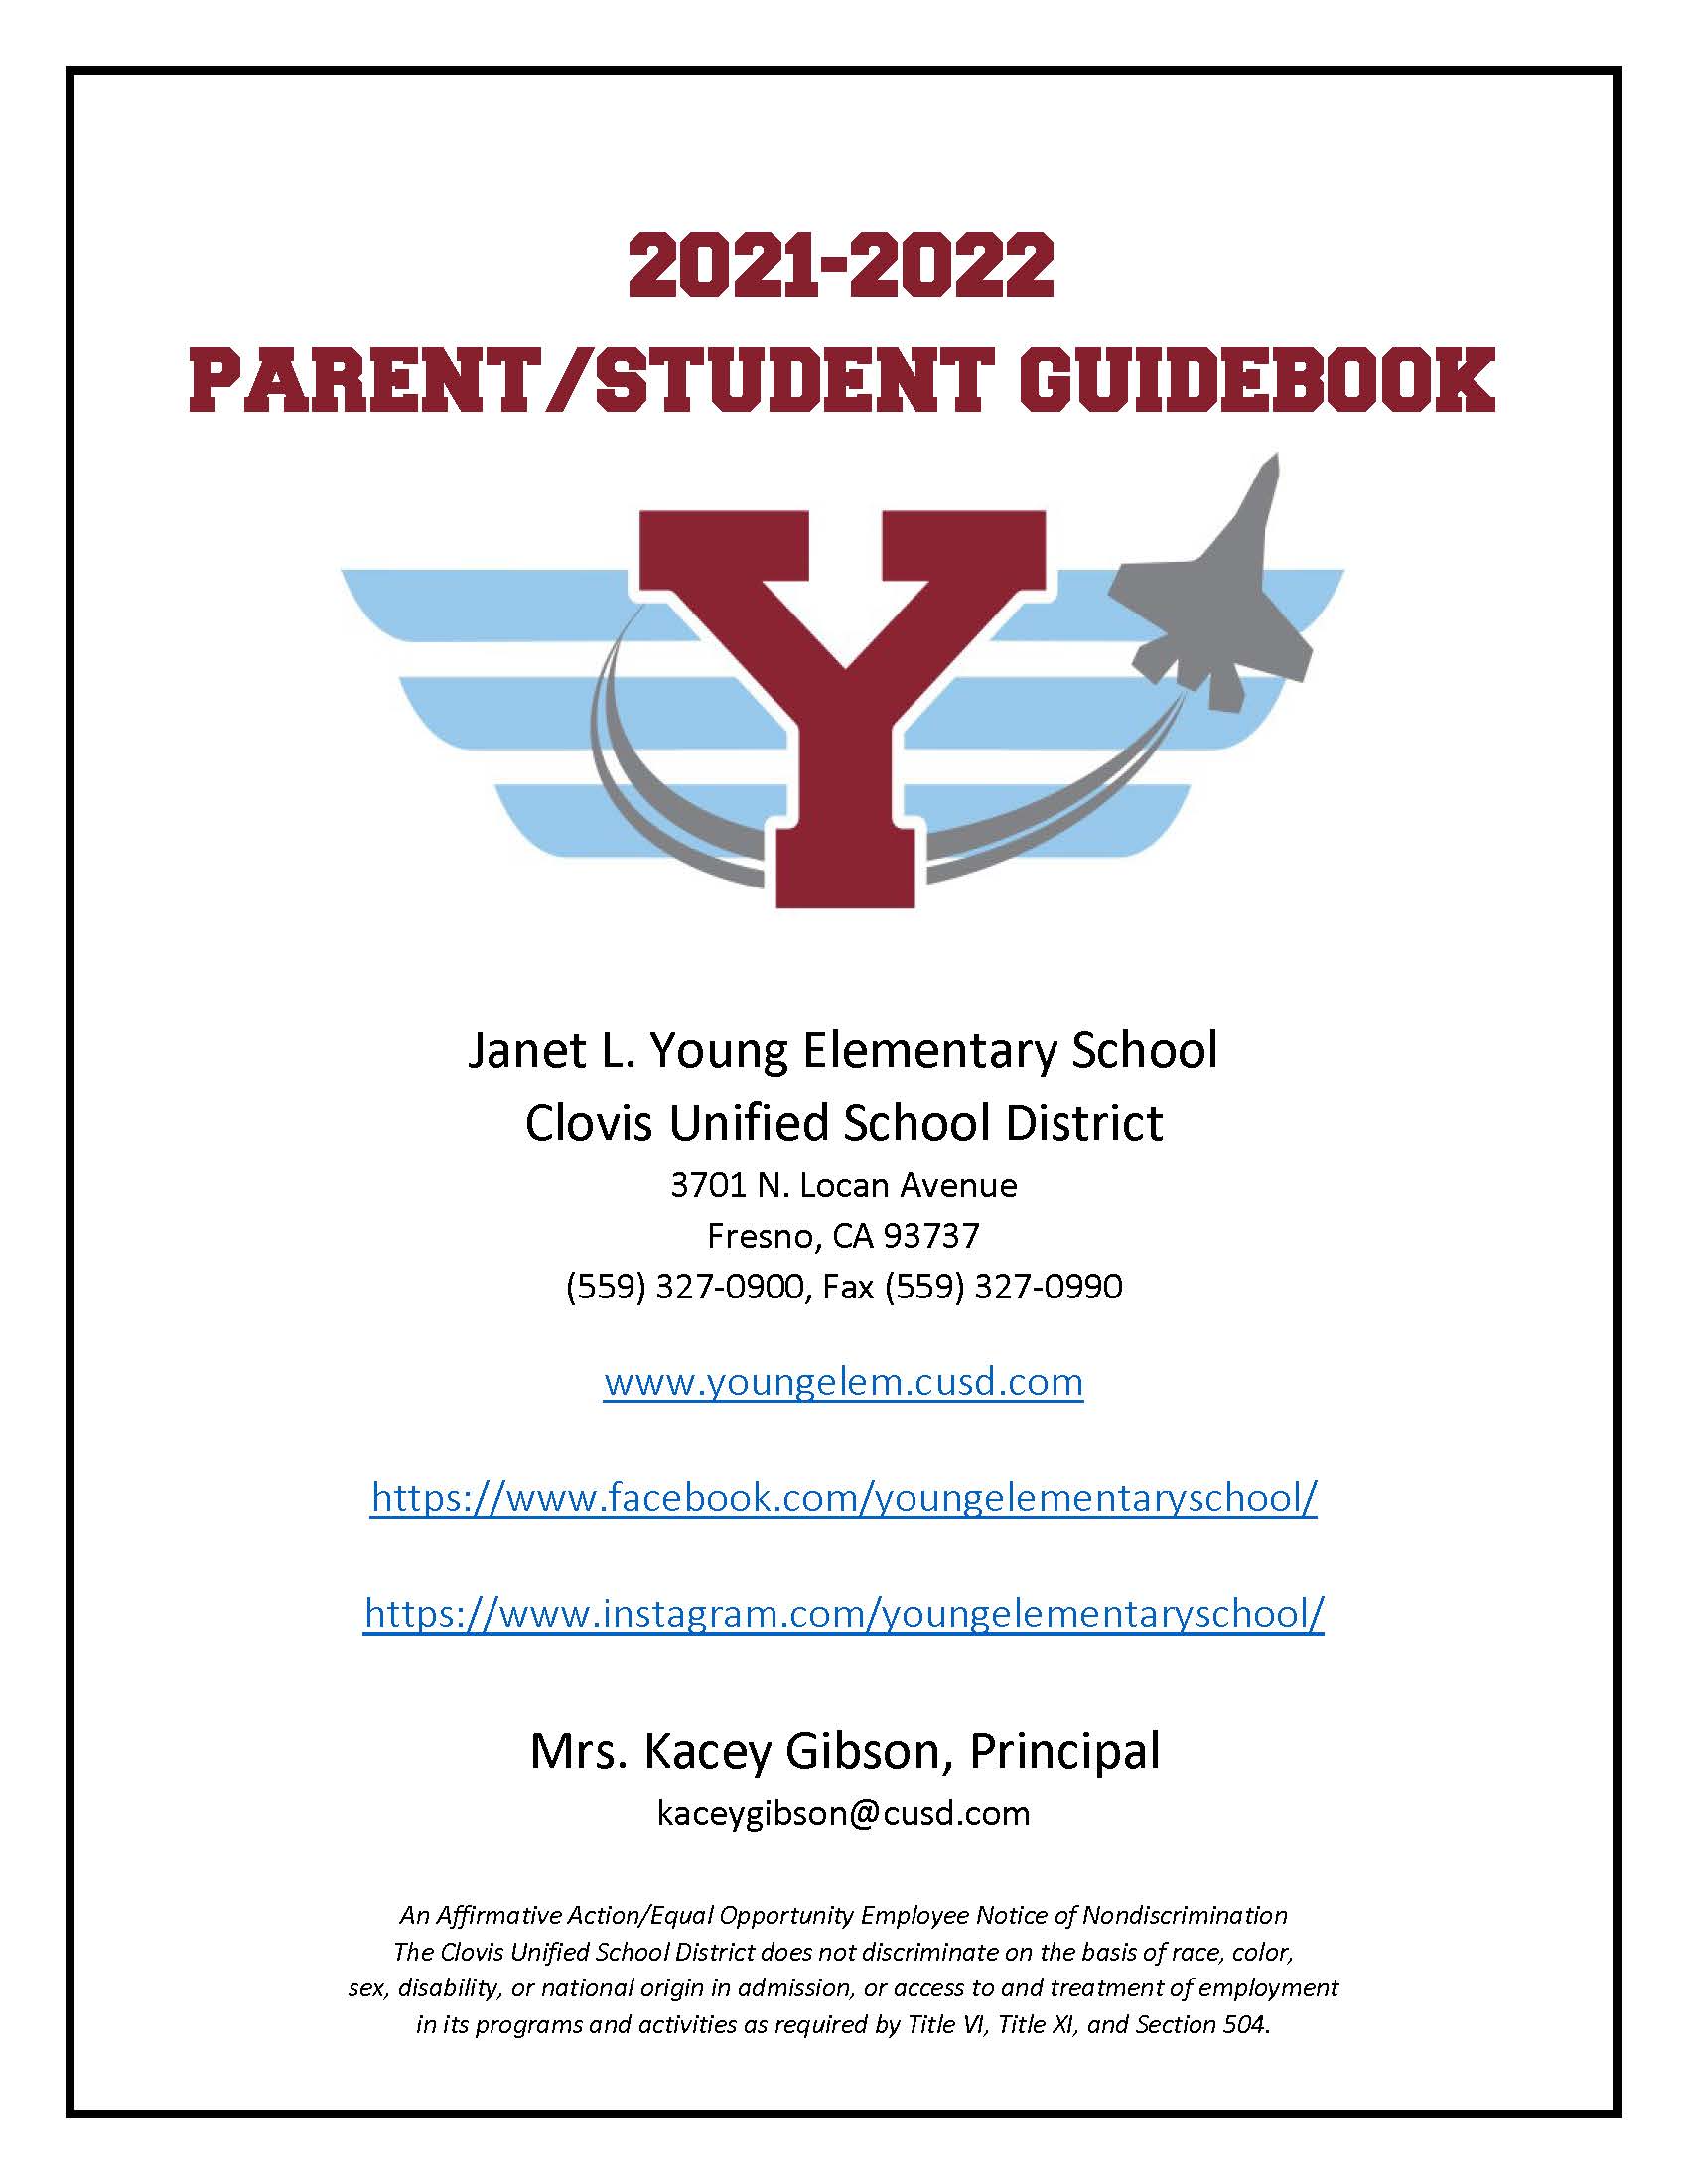 Image for: 2021-22 Parent/Student Guidebook